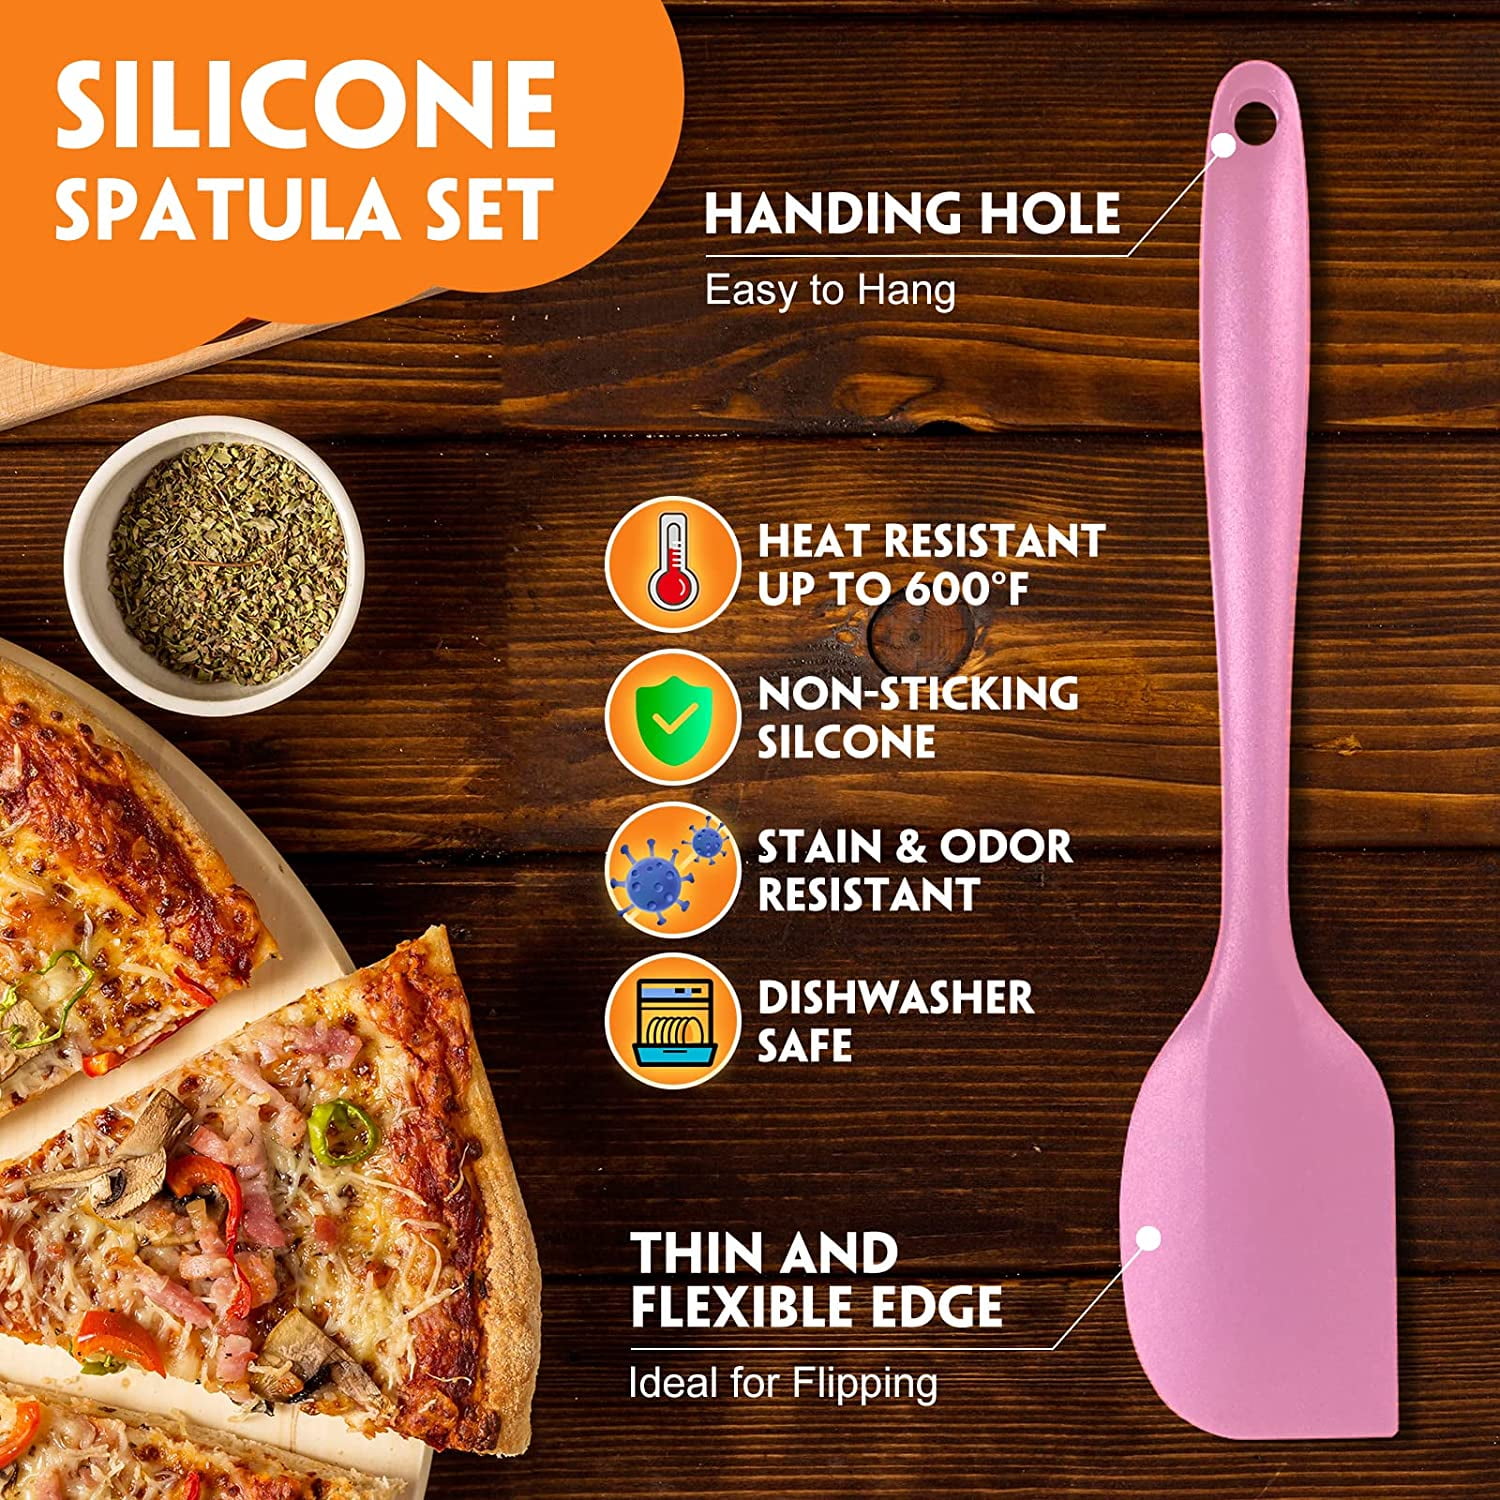 zYoung 4 Pcs Heat Resistant Silicone Spatulas Set,Small